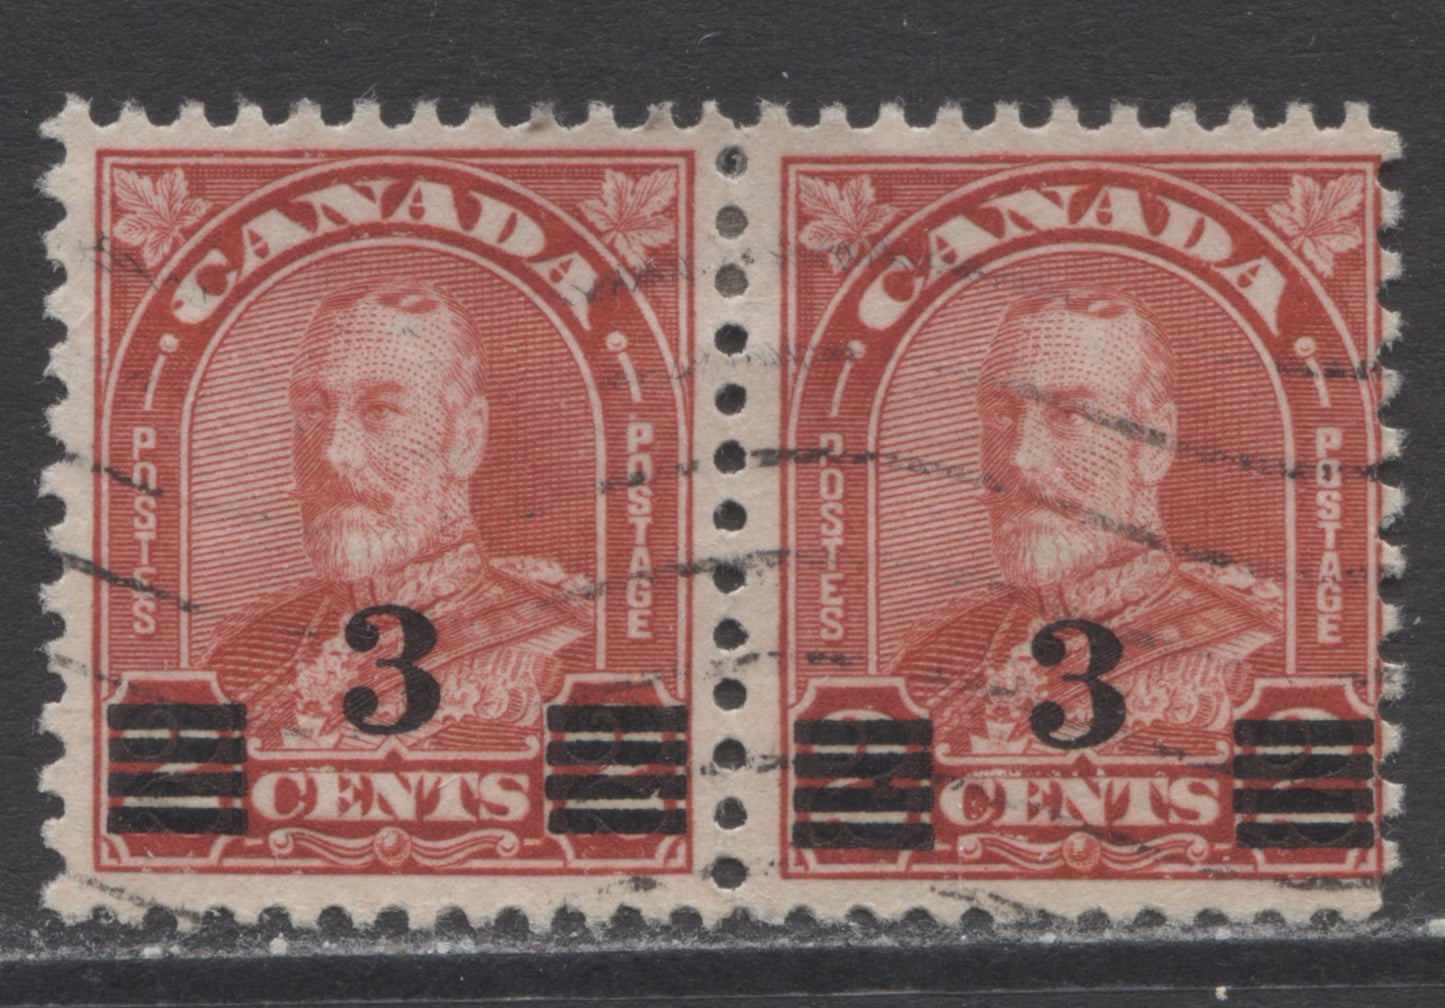 Lot 178 Canada #191a 3c On 2c Deep Red King George V, 1932 Arch/Leaf Provisional Issue, A Very Fine Used Pair Showing A Dot in C Of Canada, Plate 4 UR Pos. 65, Die 1